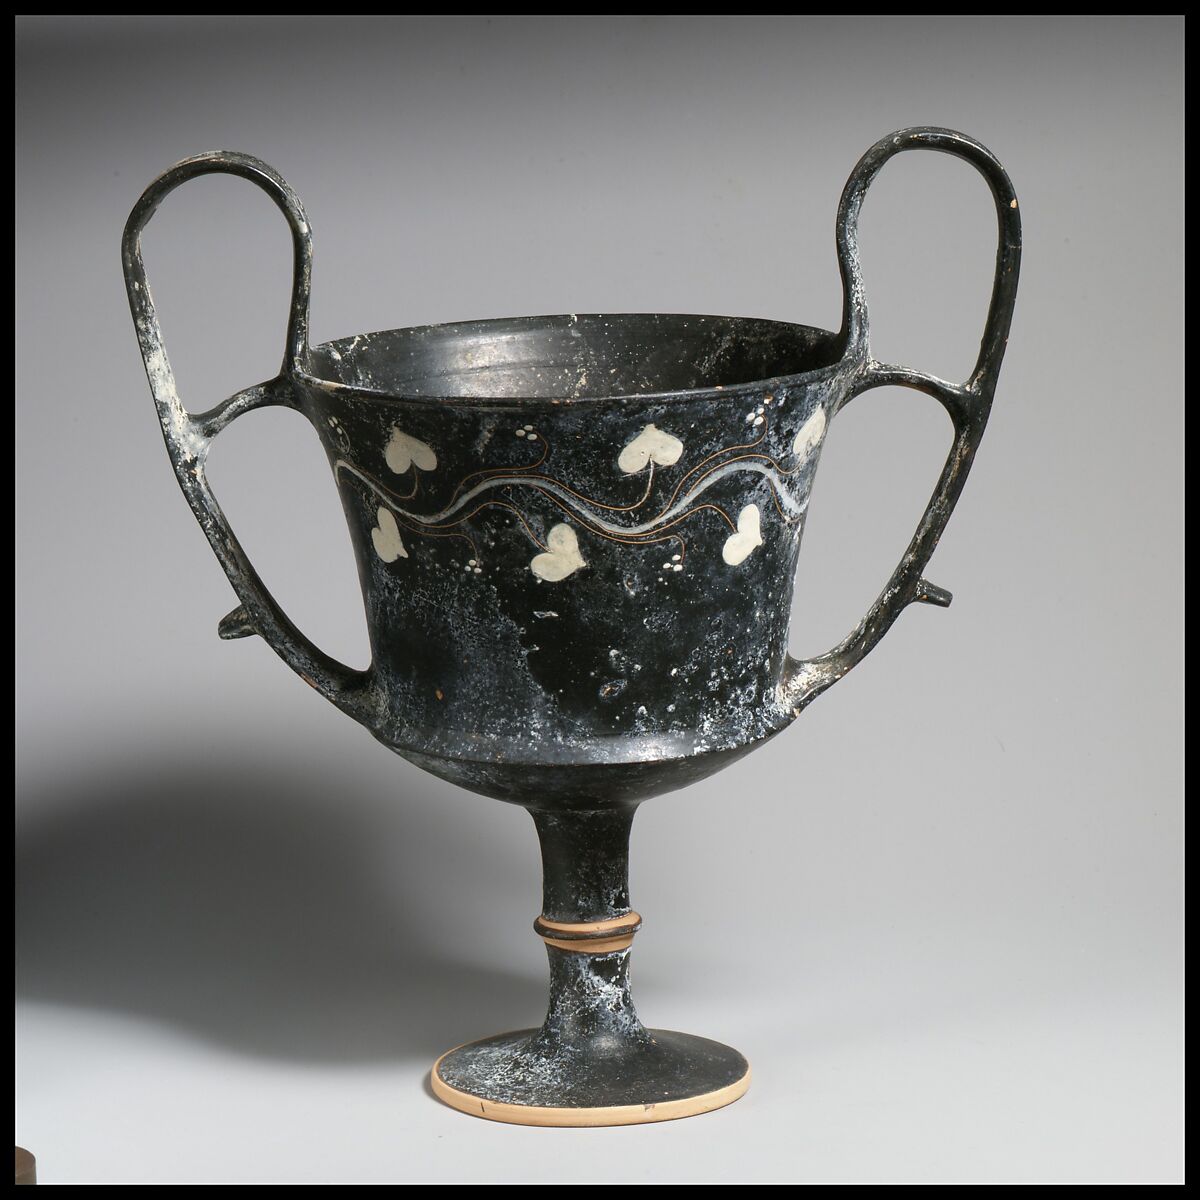 Terracotta kantharos (drinking cup with two high handles), Terracotta, Greek, Boeotian 